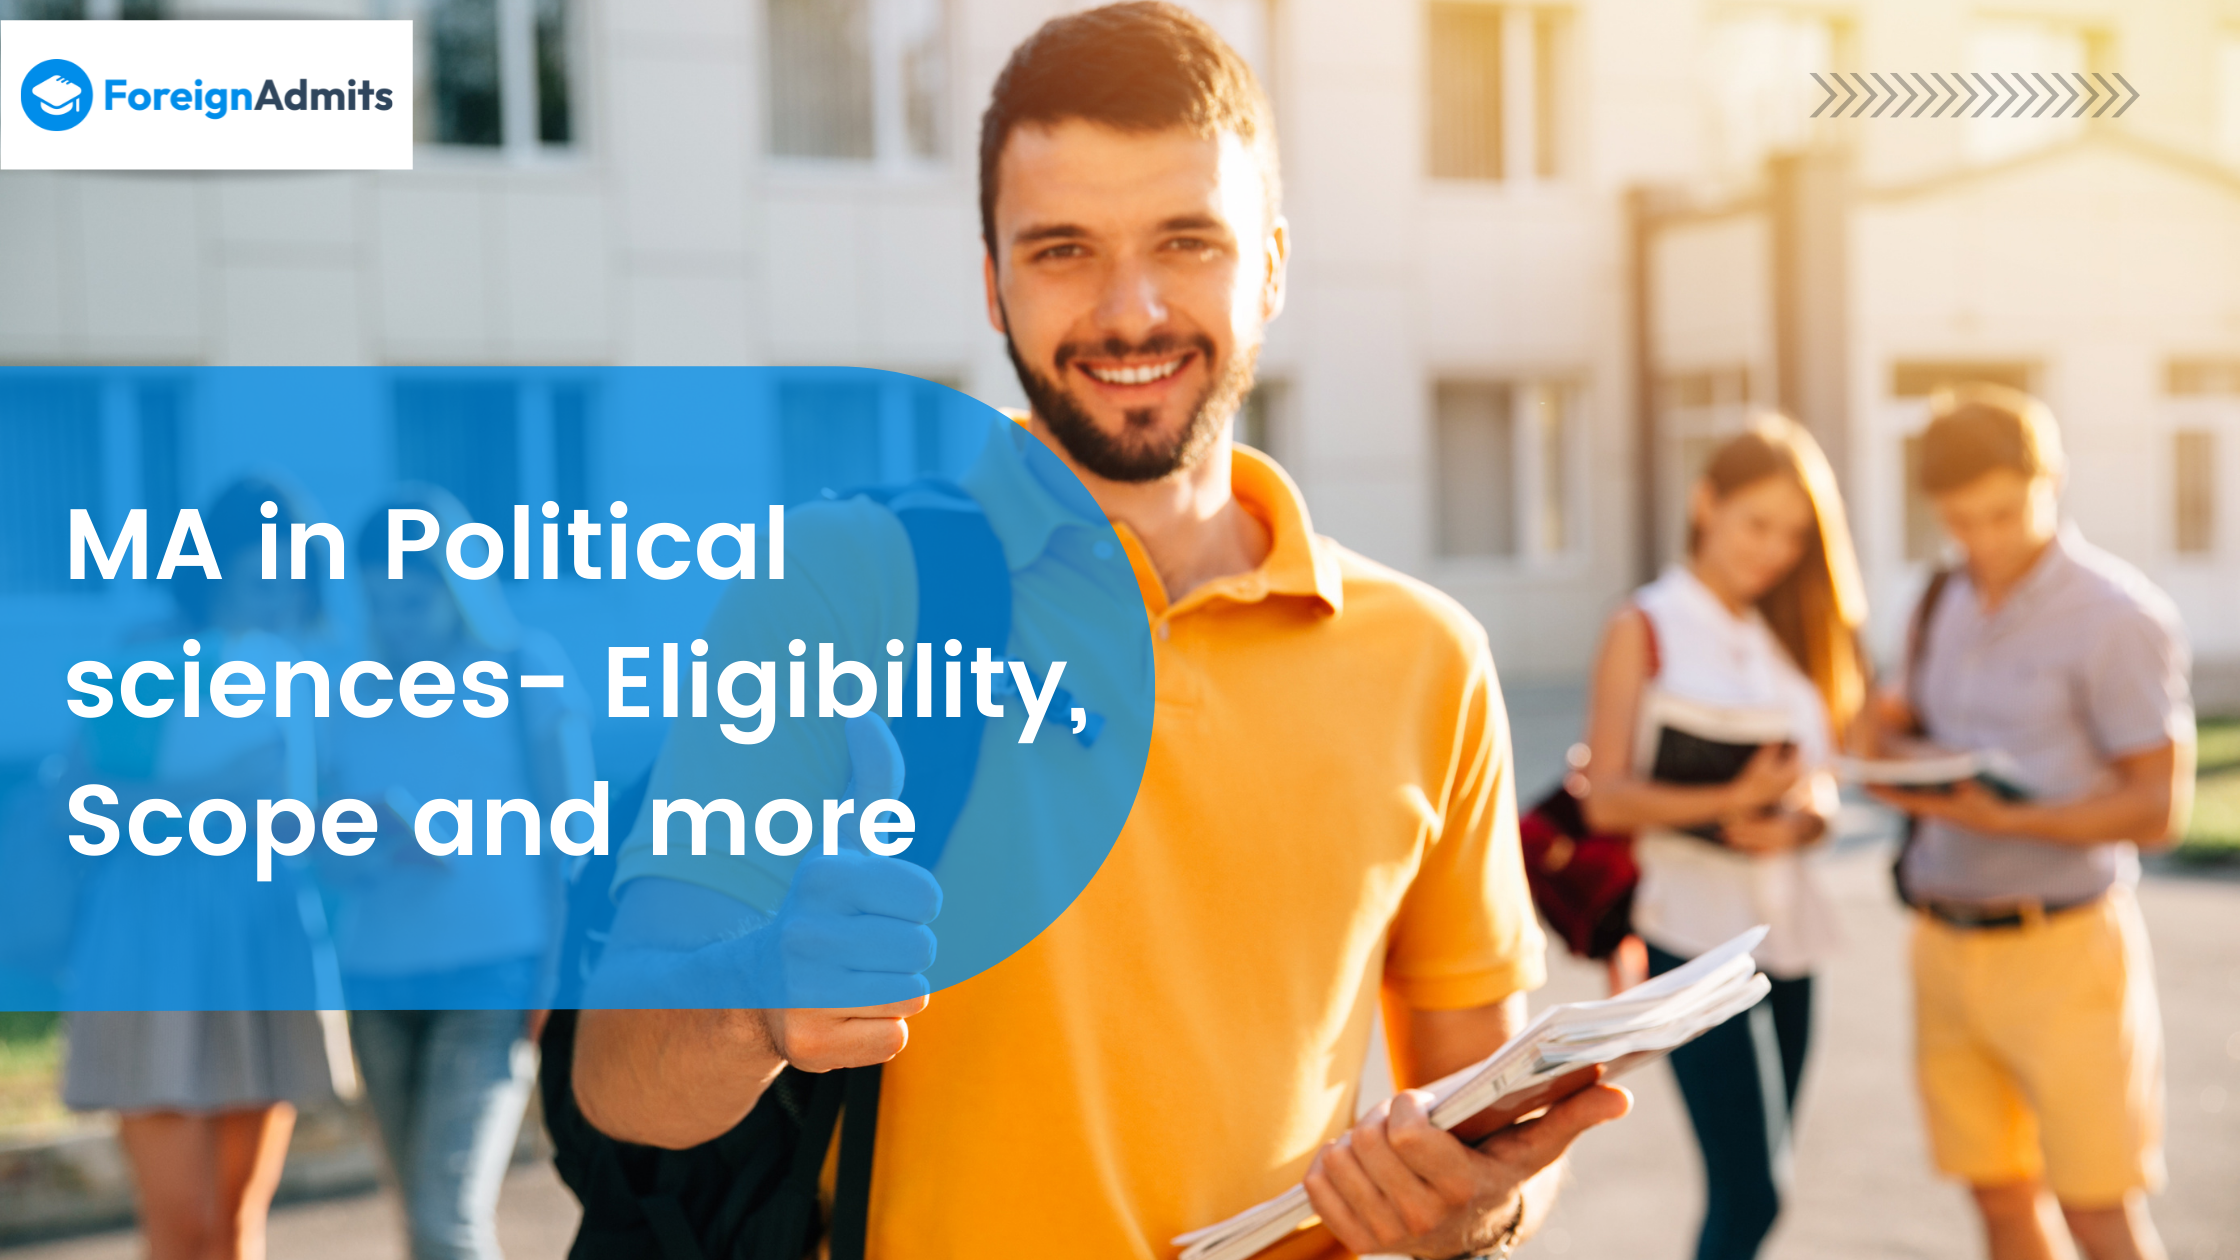 MA in Political sciences – Eligibility, Scope and more